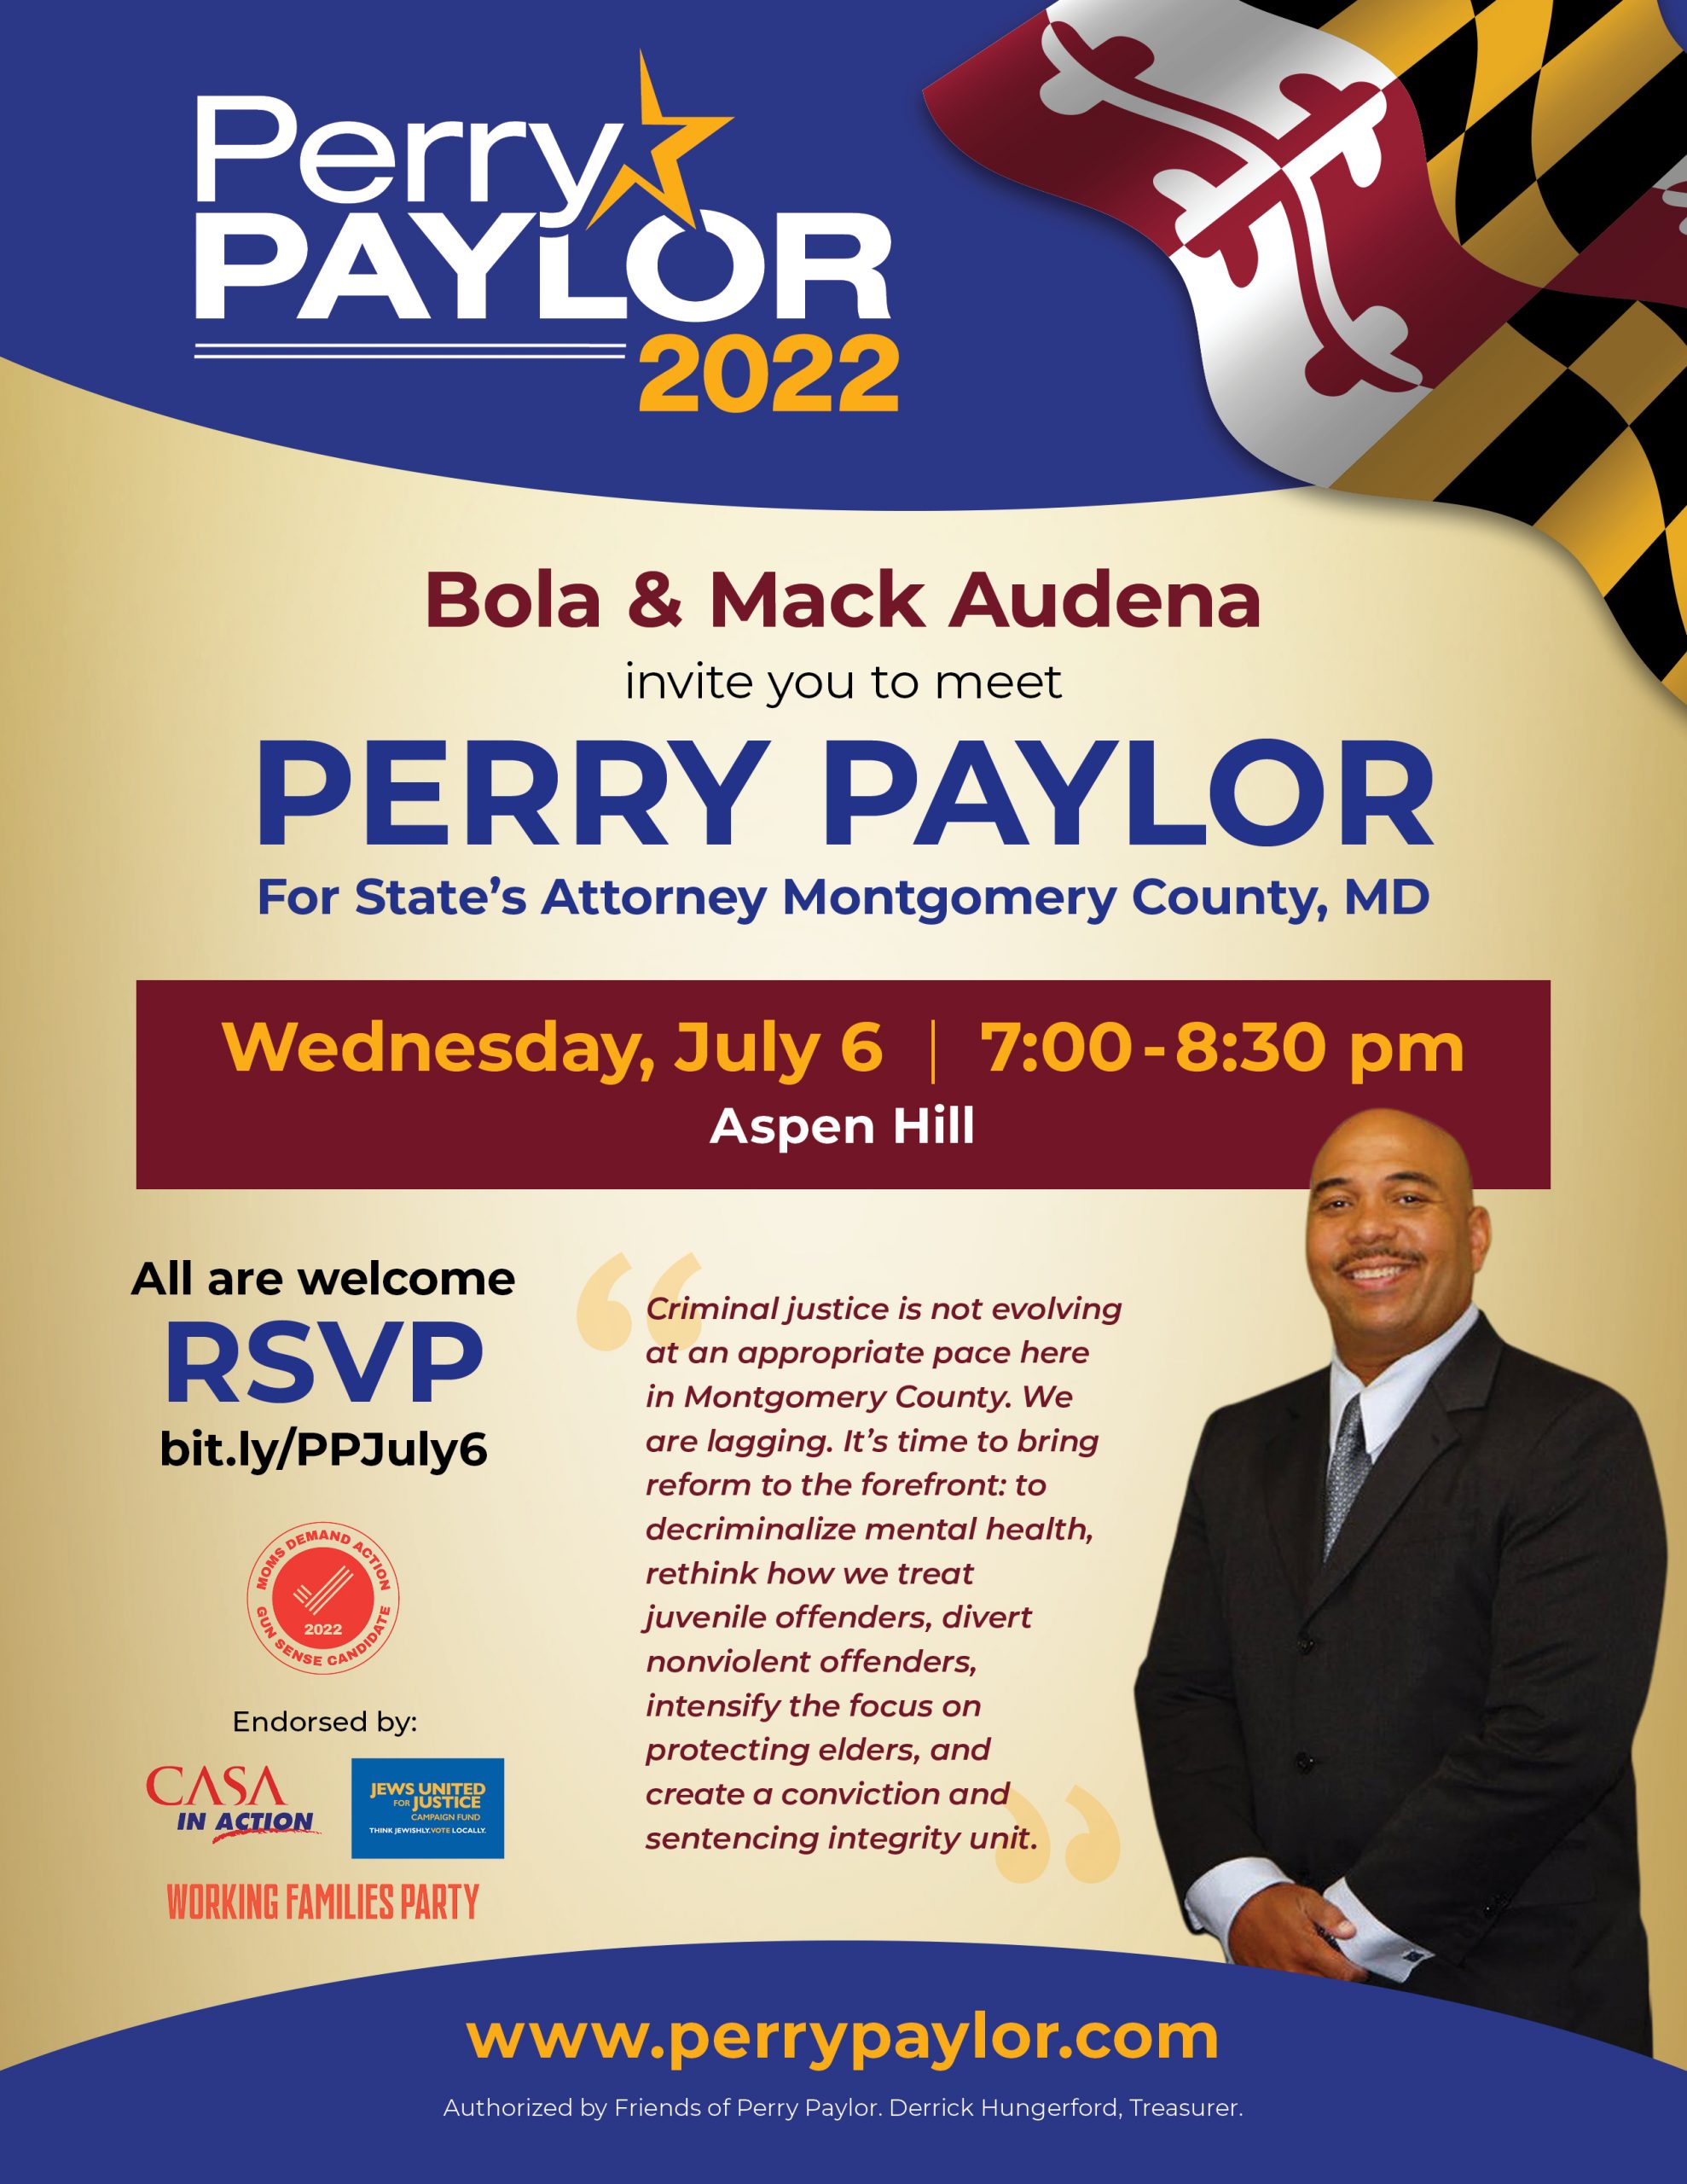 Aspen Hill house party for Perry Paylor July 6